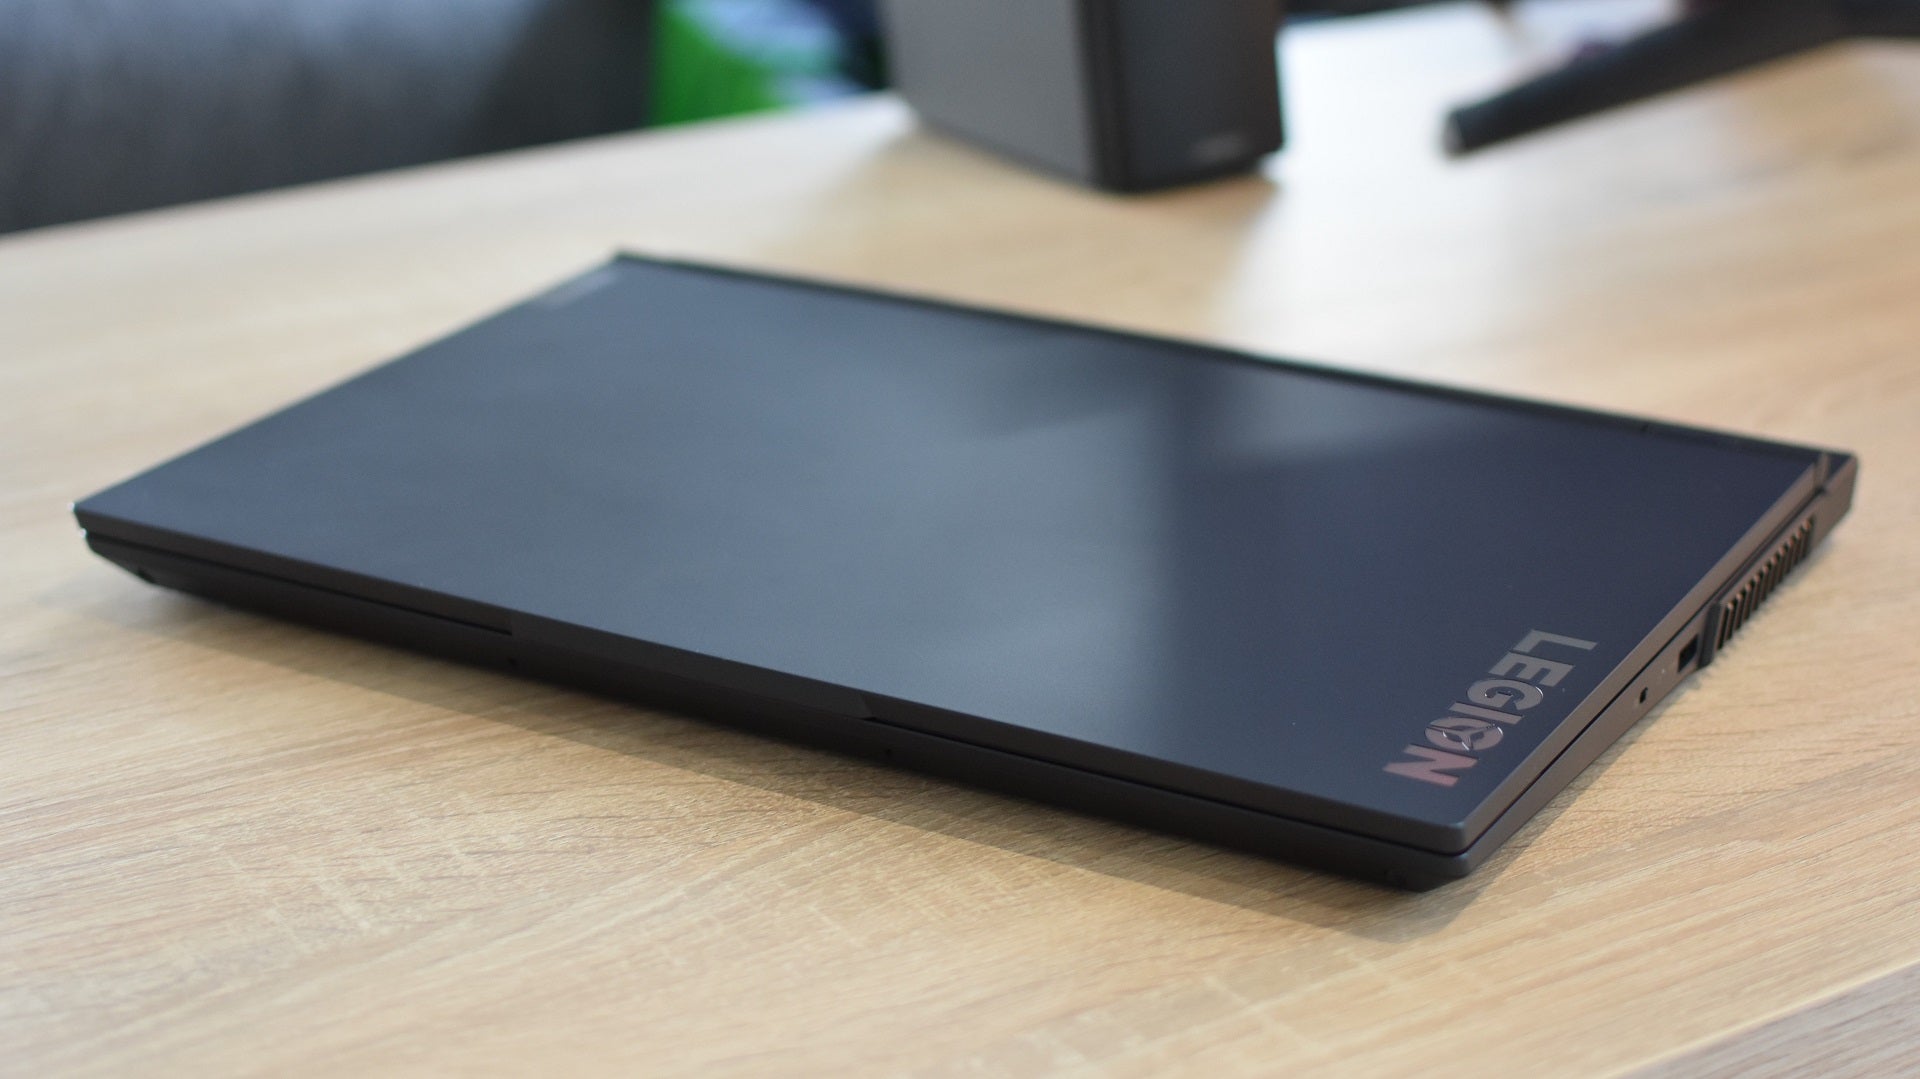 The Lenovo Legion 5 gaming laptop, closed and sat on a desk.